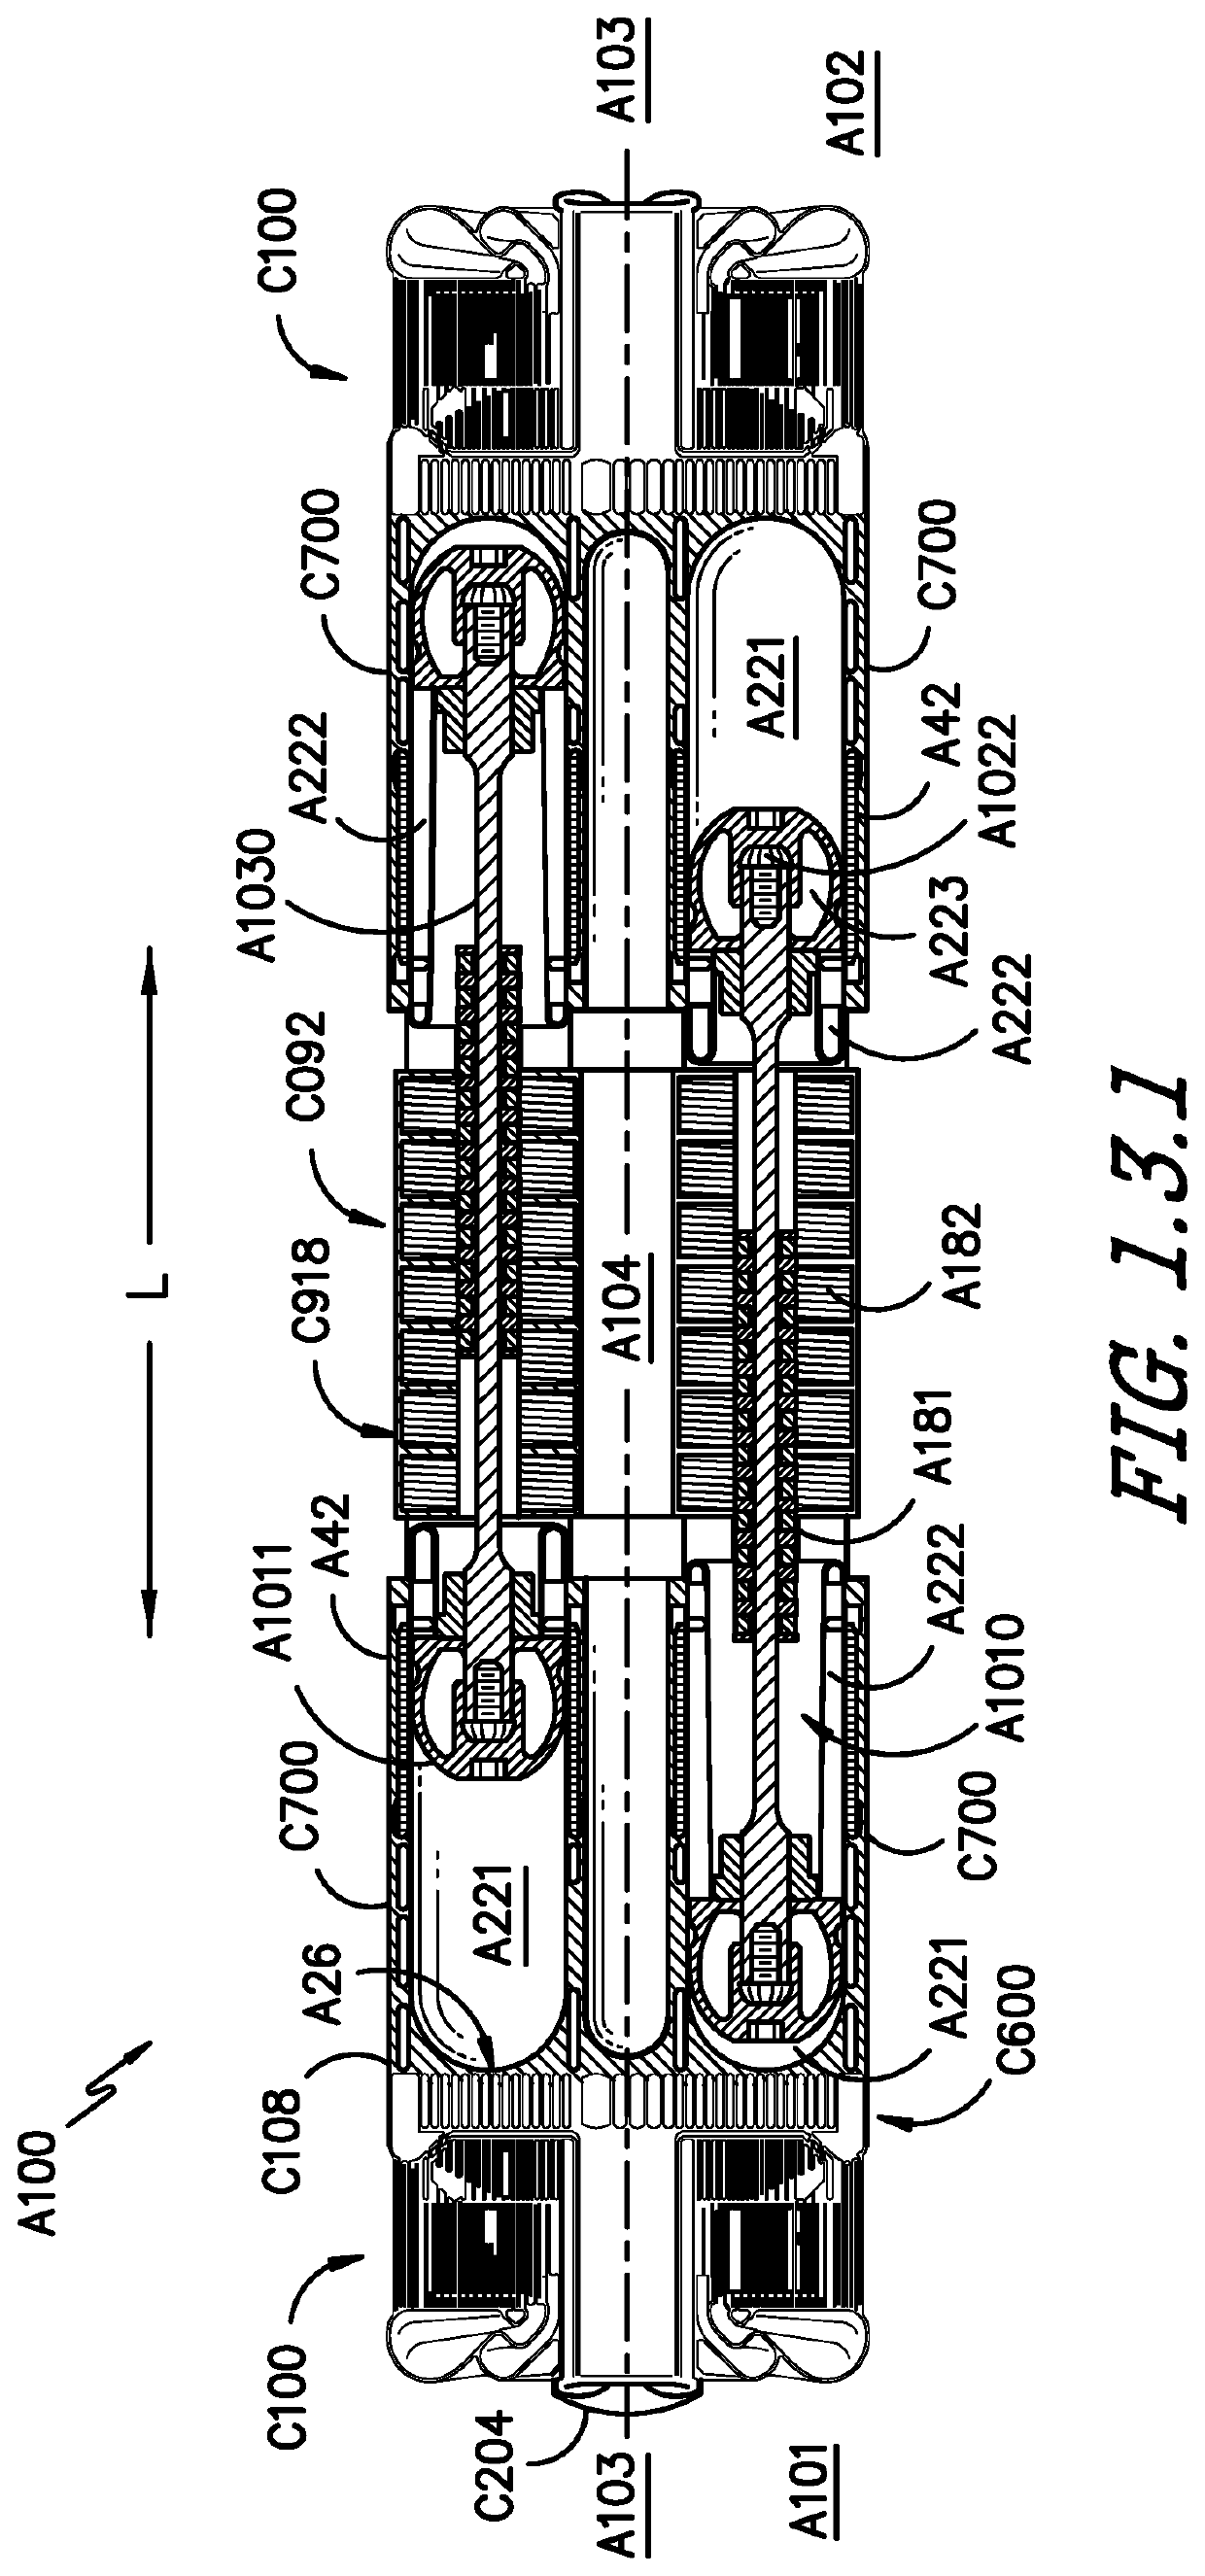 System and apparatus for energy conversion